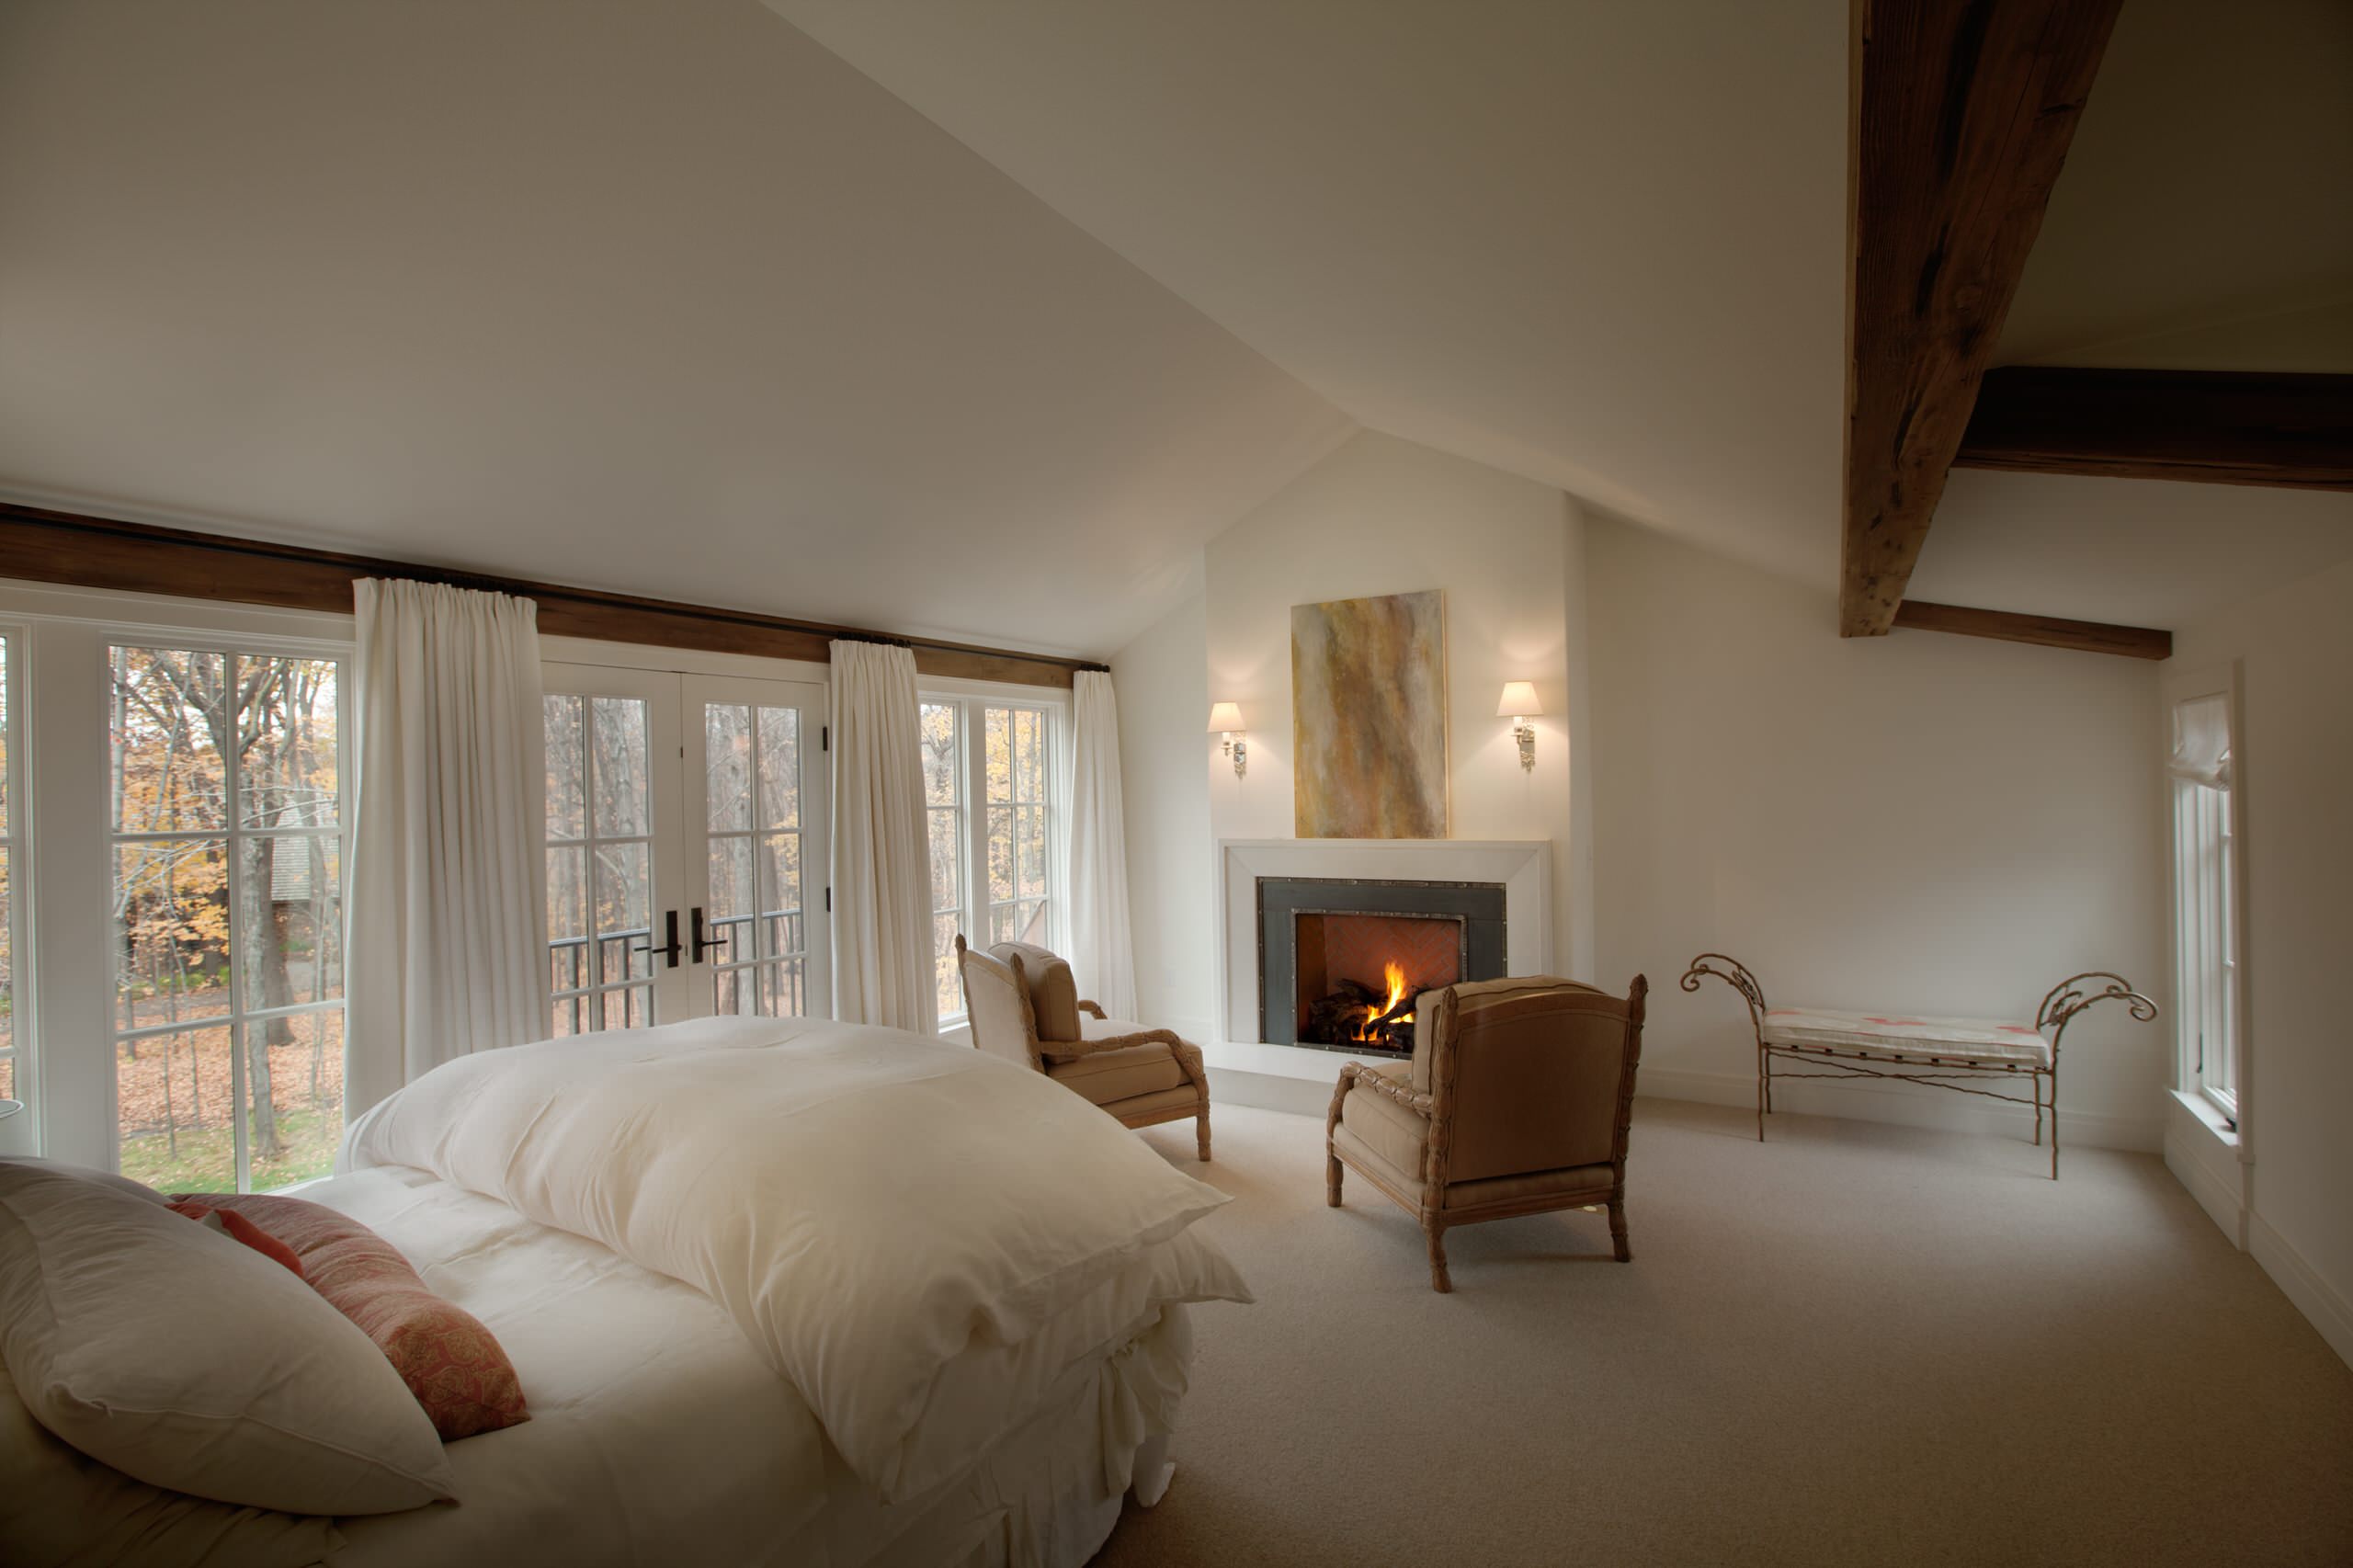 English Country in Northome - Farmhouse - Bedroom - Minneapolis - by Murphy  & Co. Design | Houzz